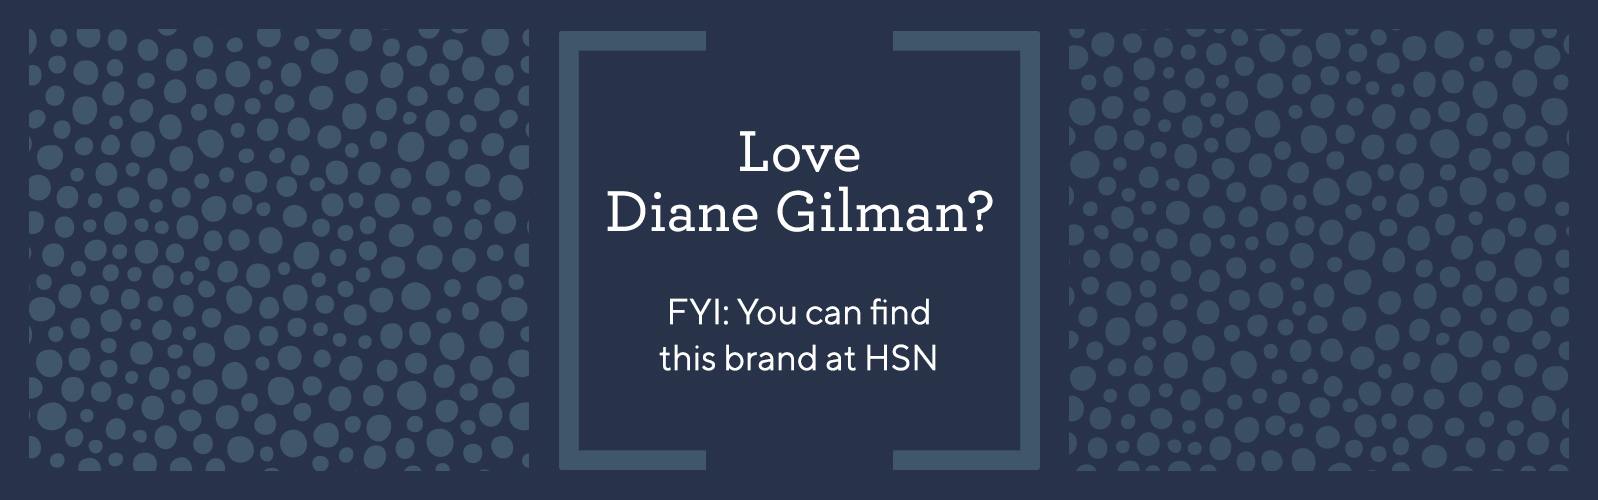 Love Diane Gilman?  FYI: You can find this brand at HSN